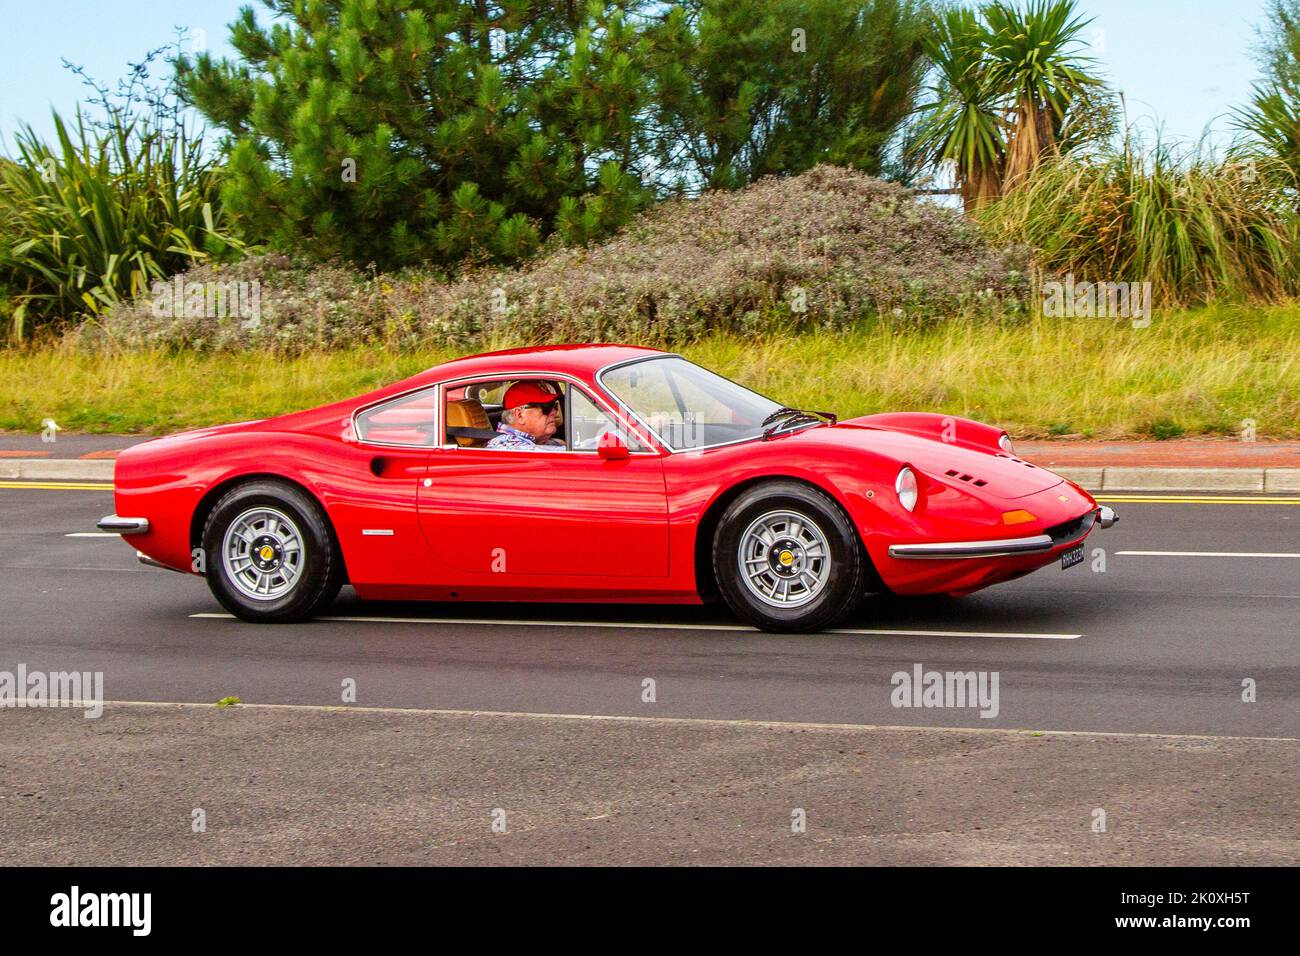 1973 70s seventies red  FERRARI DINO 2416 cc V6 engine petrol roadster; on display at the Southport Classic car and Speed event on the seafront promenade. Stock Photo